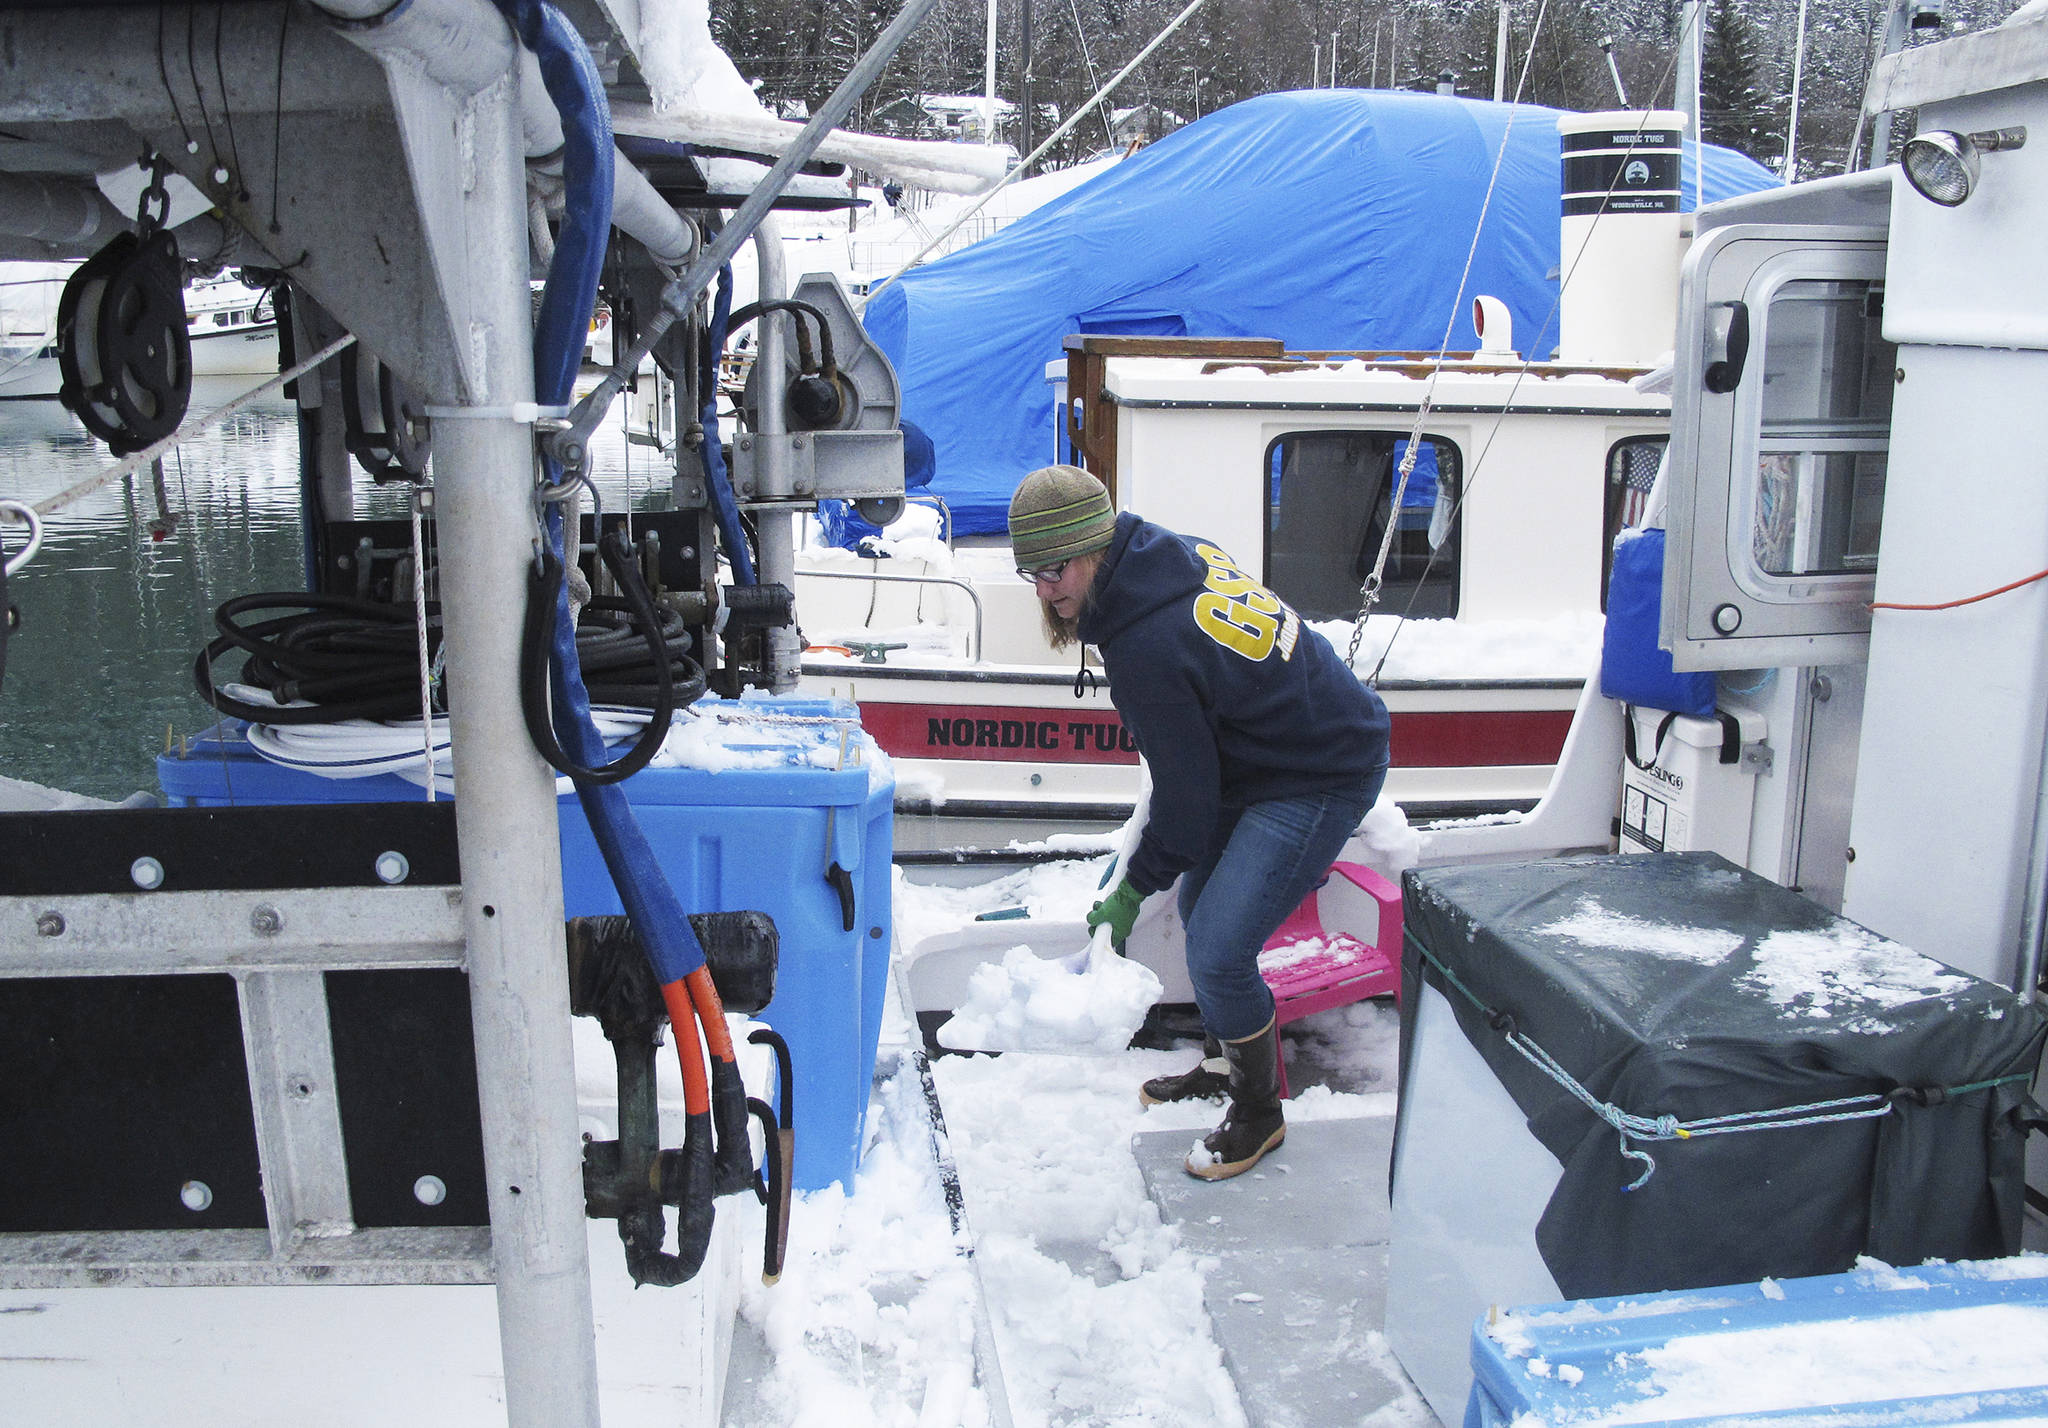 In this March 15, 2017 photo, Bonnin Jarvill, who fishes with her husband and young daughter, shovels snow from the boat that doubles as home and workplace in Juneau, Alaska. Jarvill says health care costs are a constant concern for her. (AP Photo/Becky Bohrer)